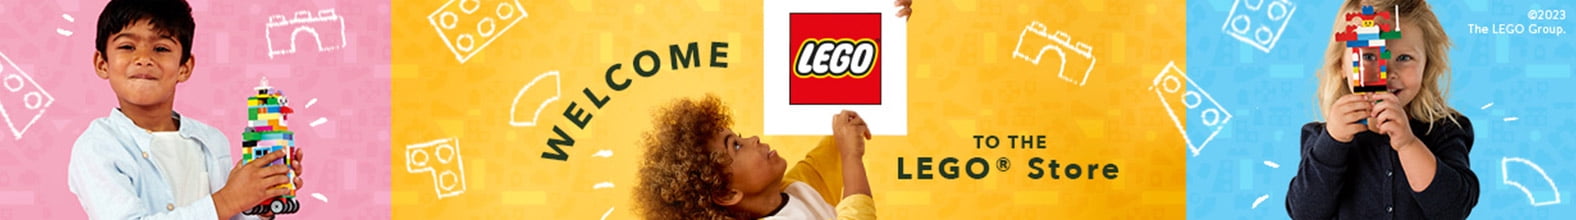 Welcome to the LEGO store